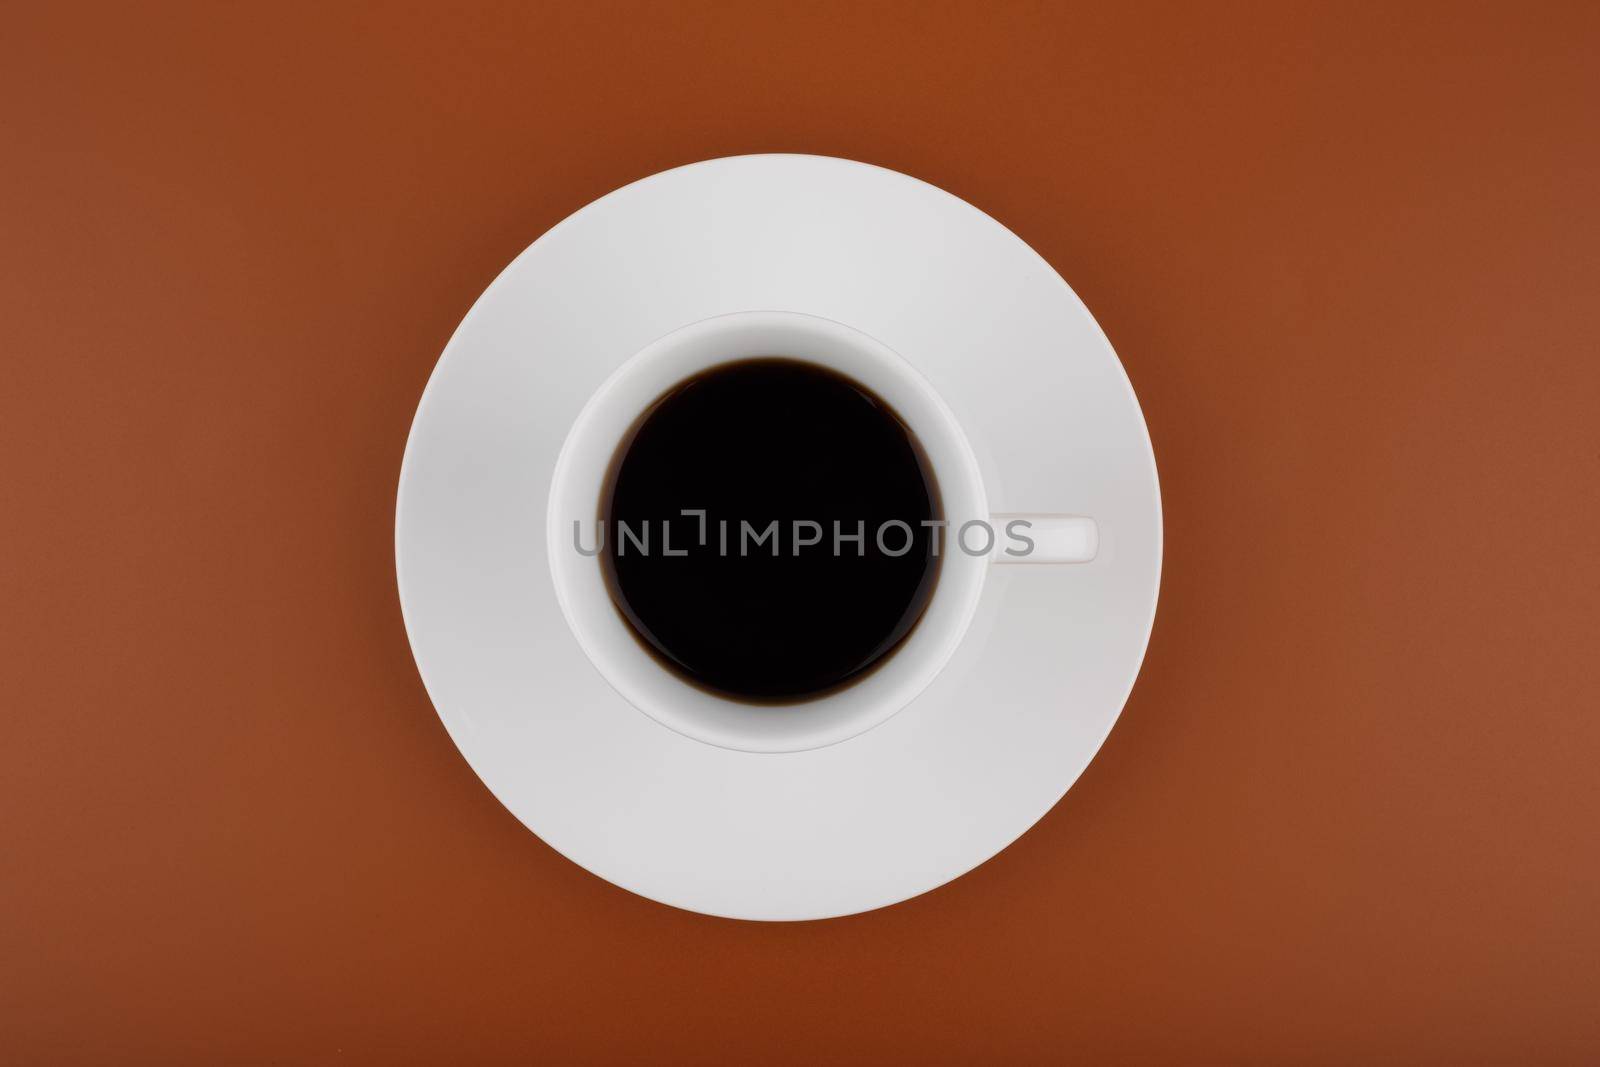 Top view of white ceramic coffee cup on a plate against brown background